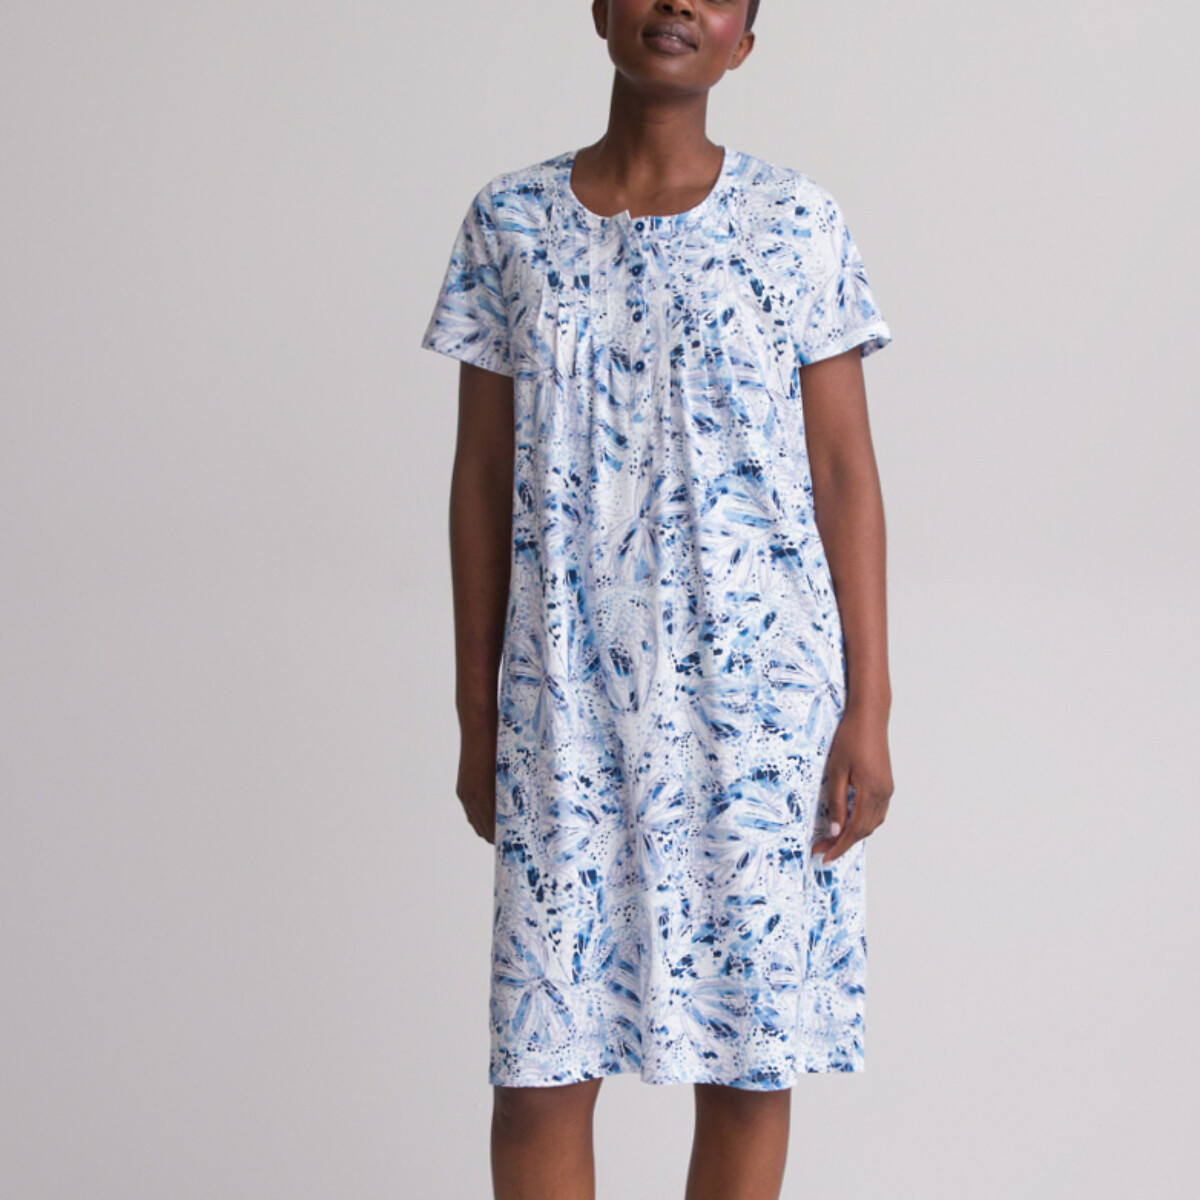 Image of Abstract Print Cotton Nightdress with Short Sleeves